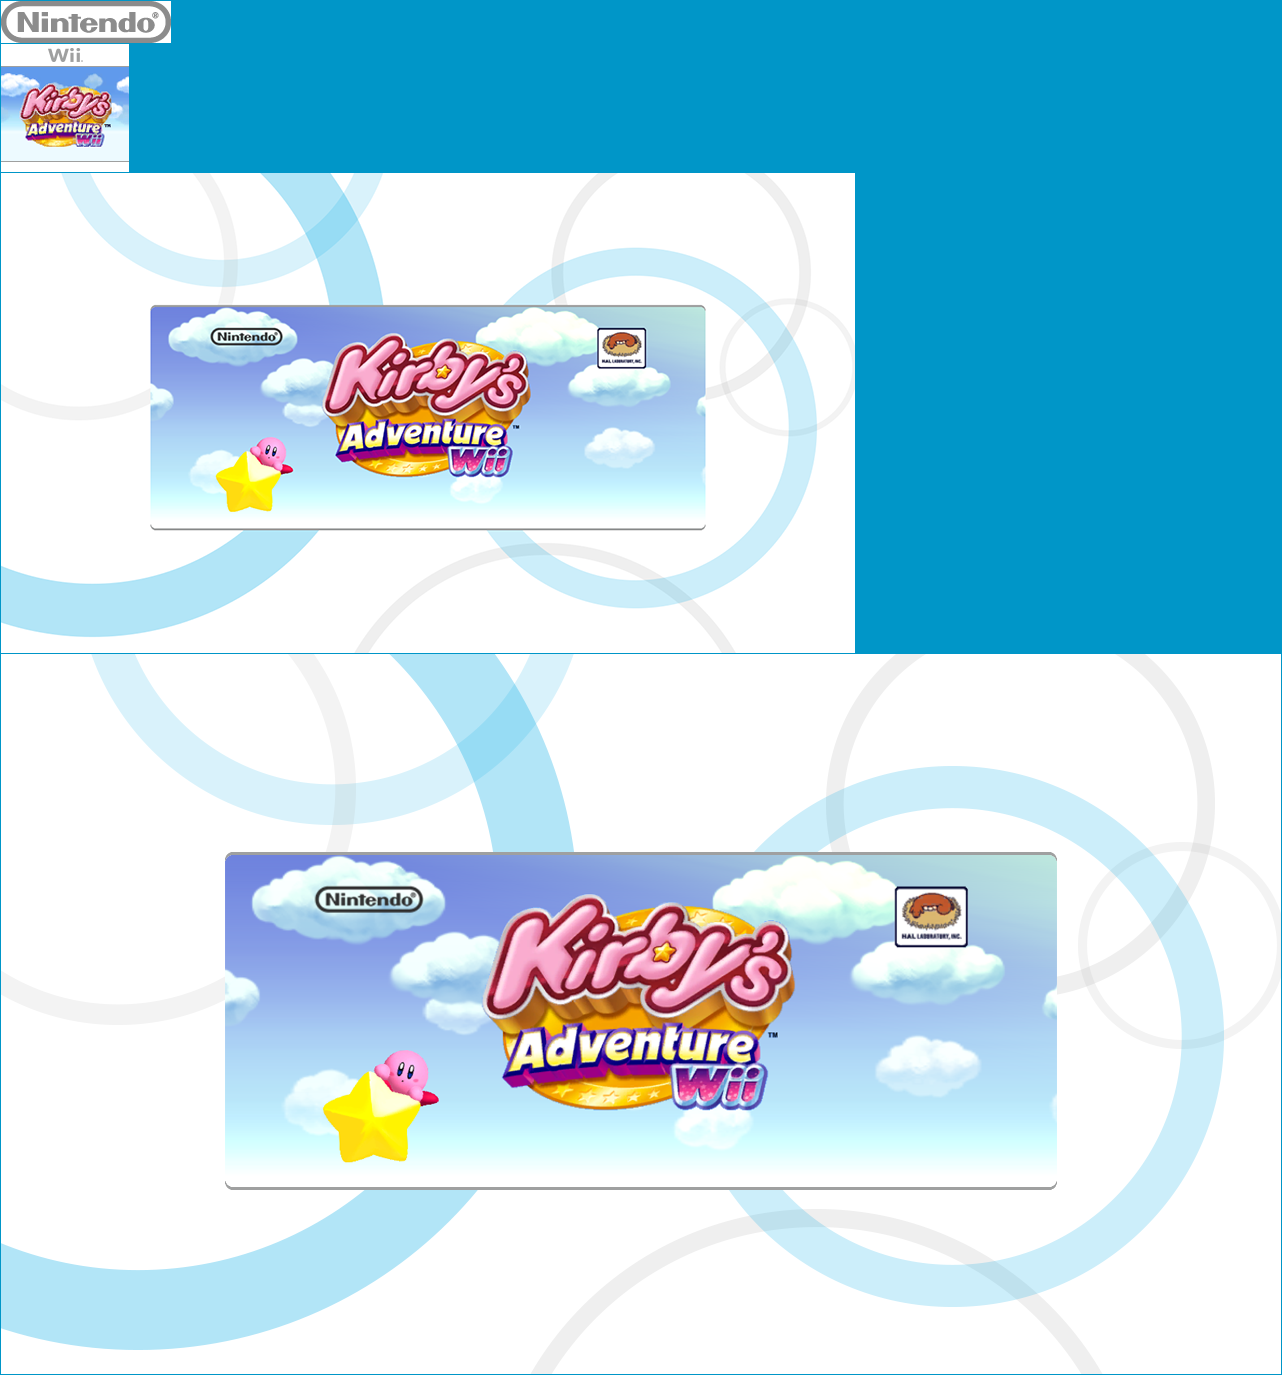 Virtual Console - Kirby's Adventure Wii